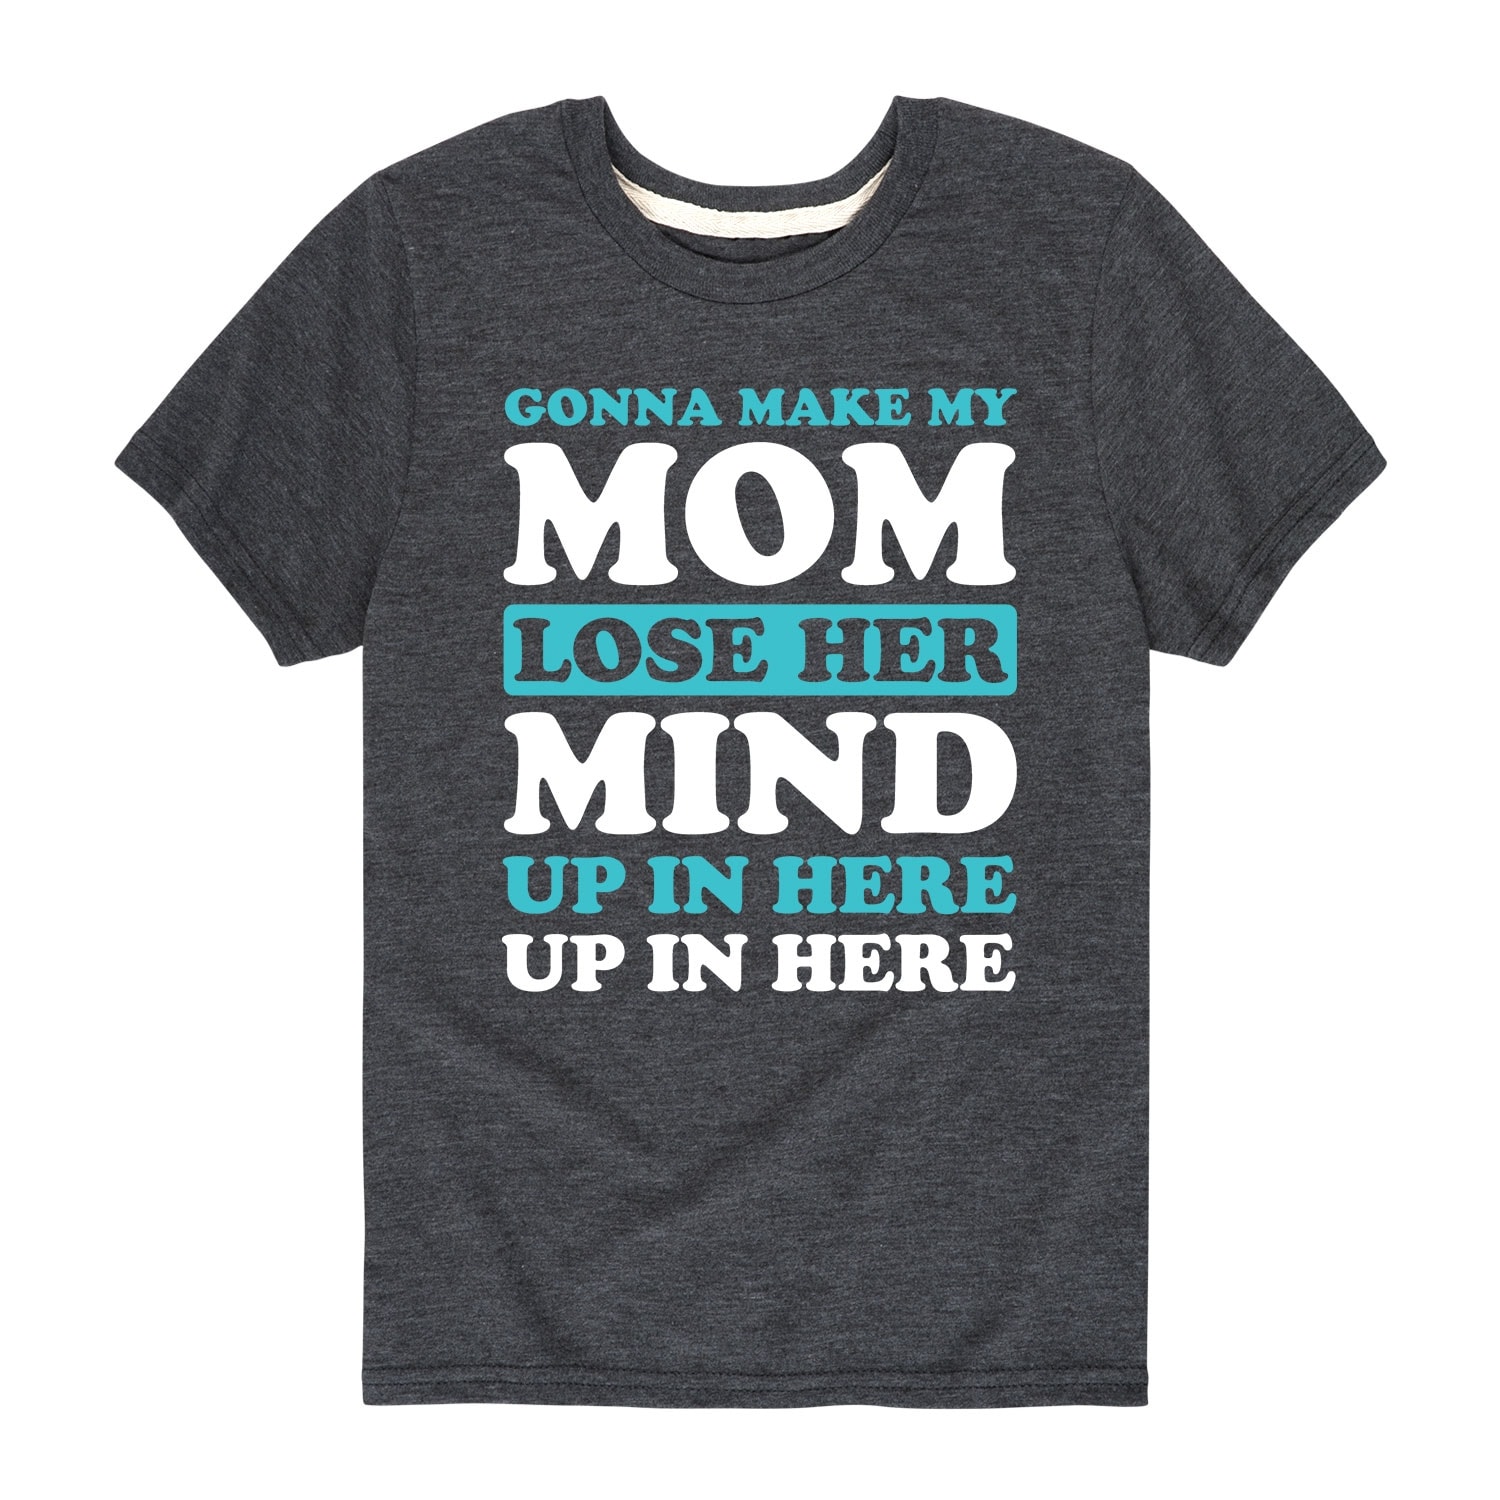 Gonna Make My Mom Lose Her Mind - Youth Short Sleeve Tee